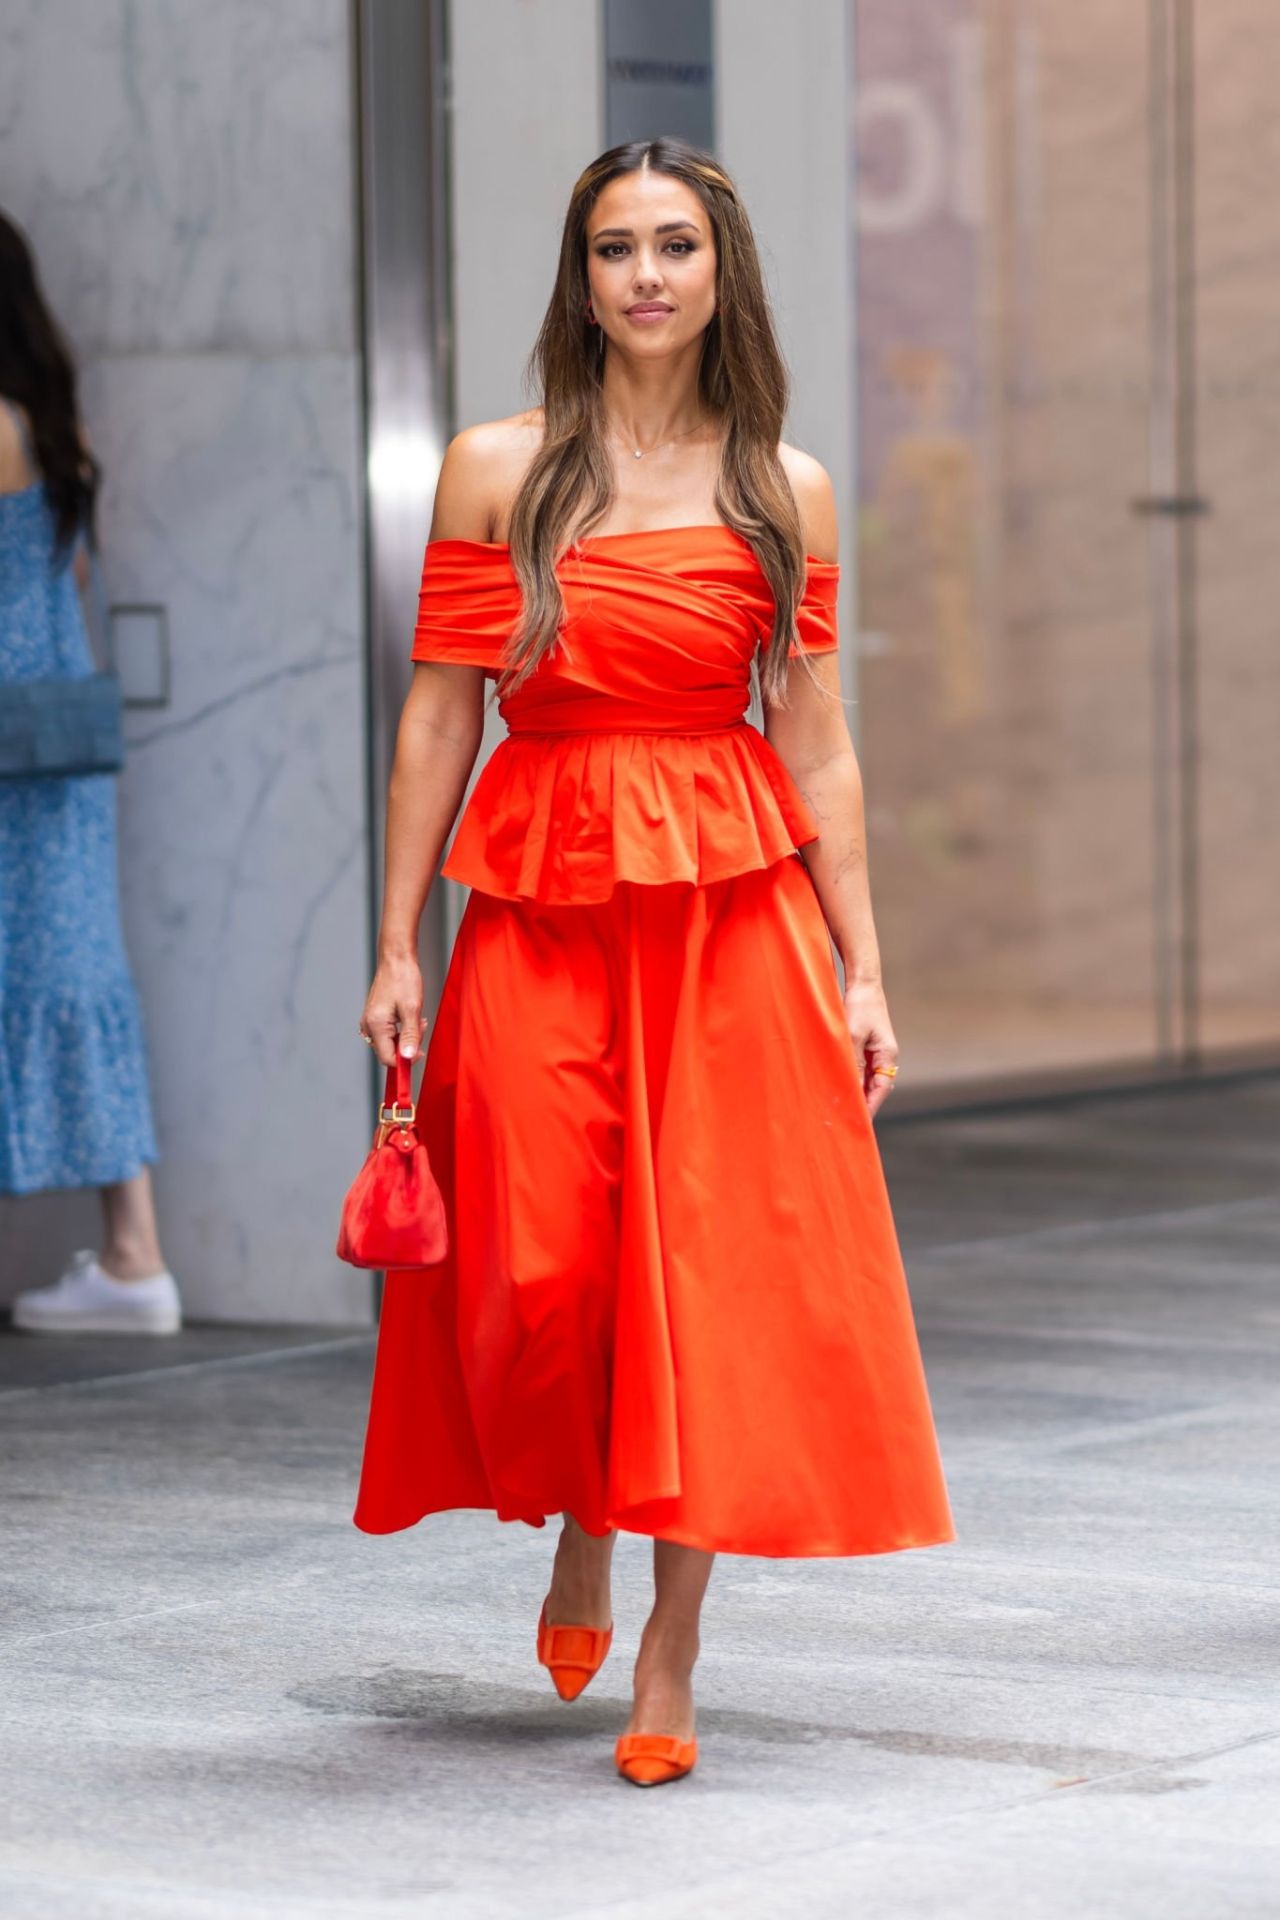 42 Year Old Jessica Alba in Gorgeous Orange Dress and Heels Out in NYC